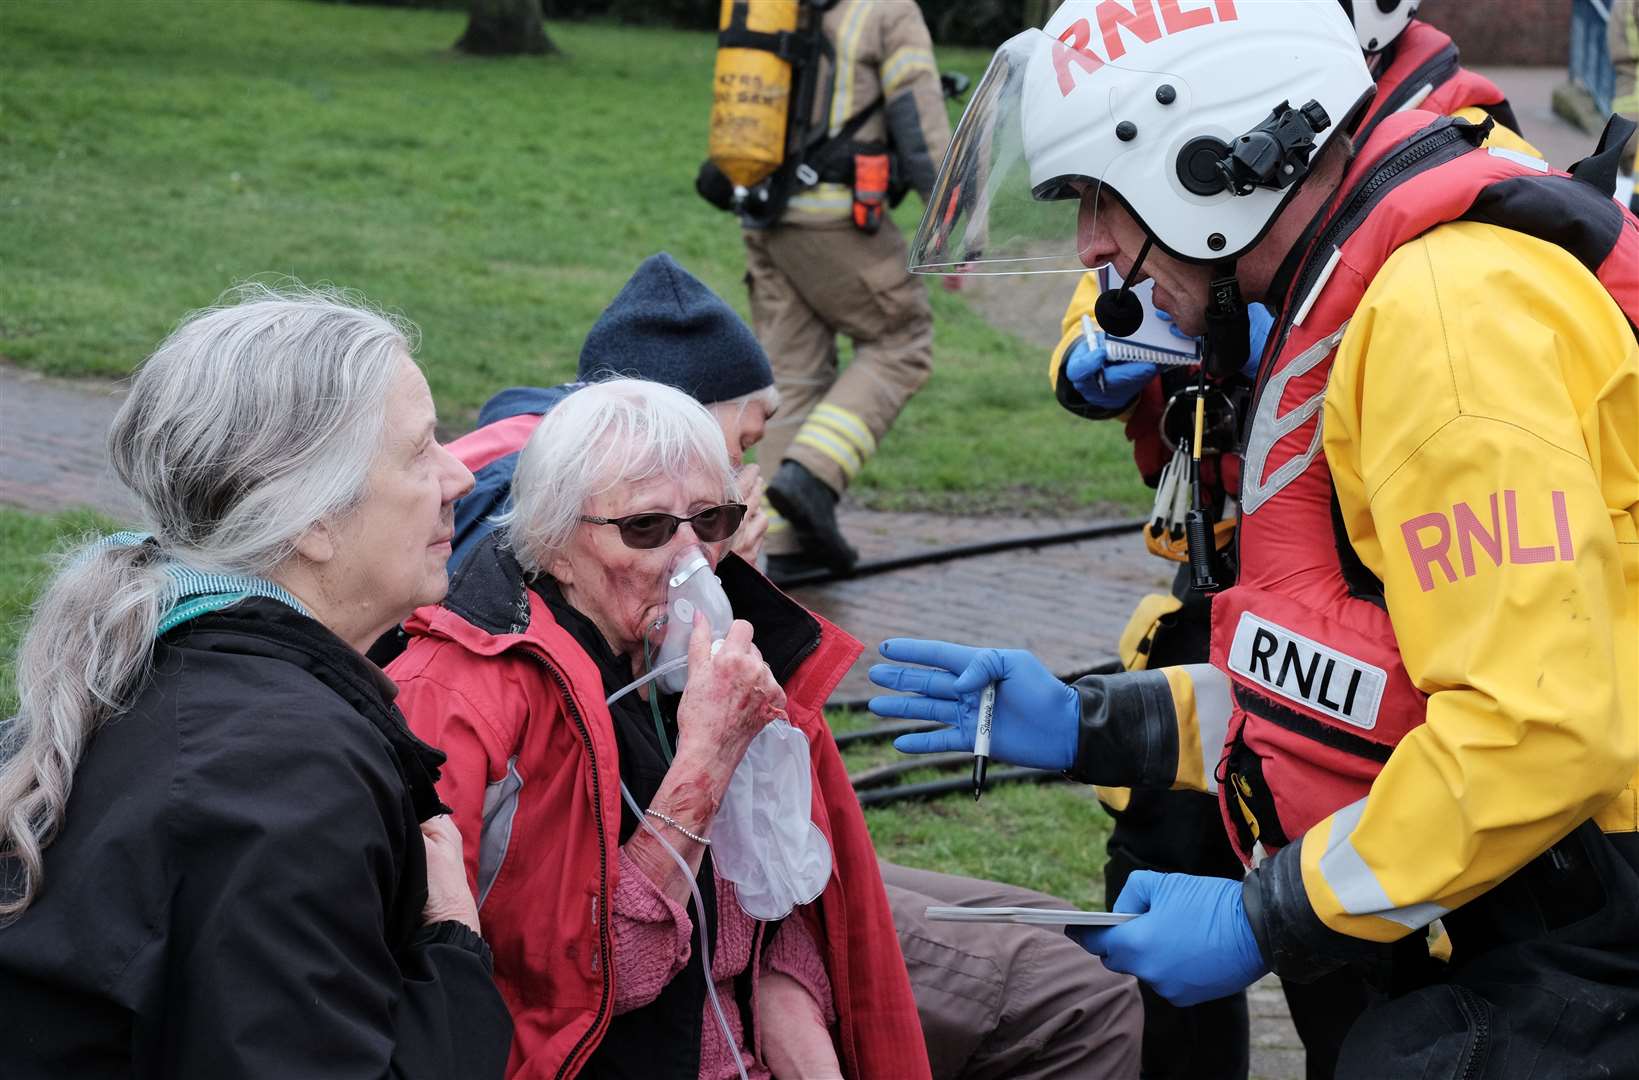 Volunteer actors from Casualties Union pretended to be injured. Picture: RNLI